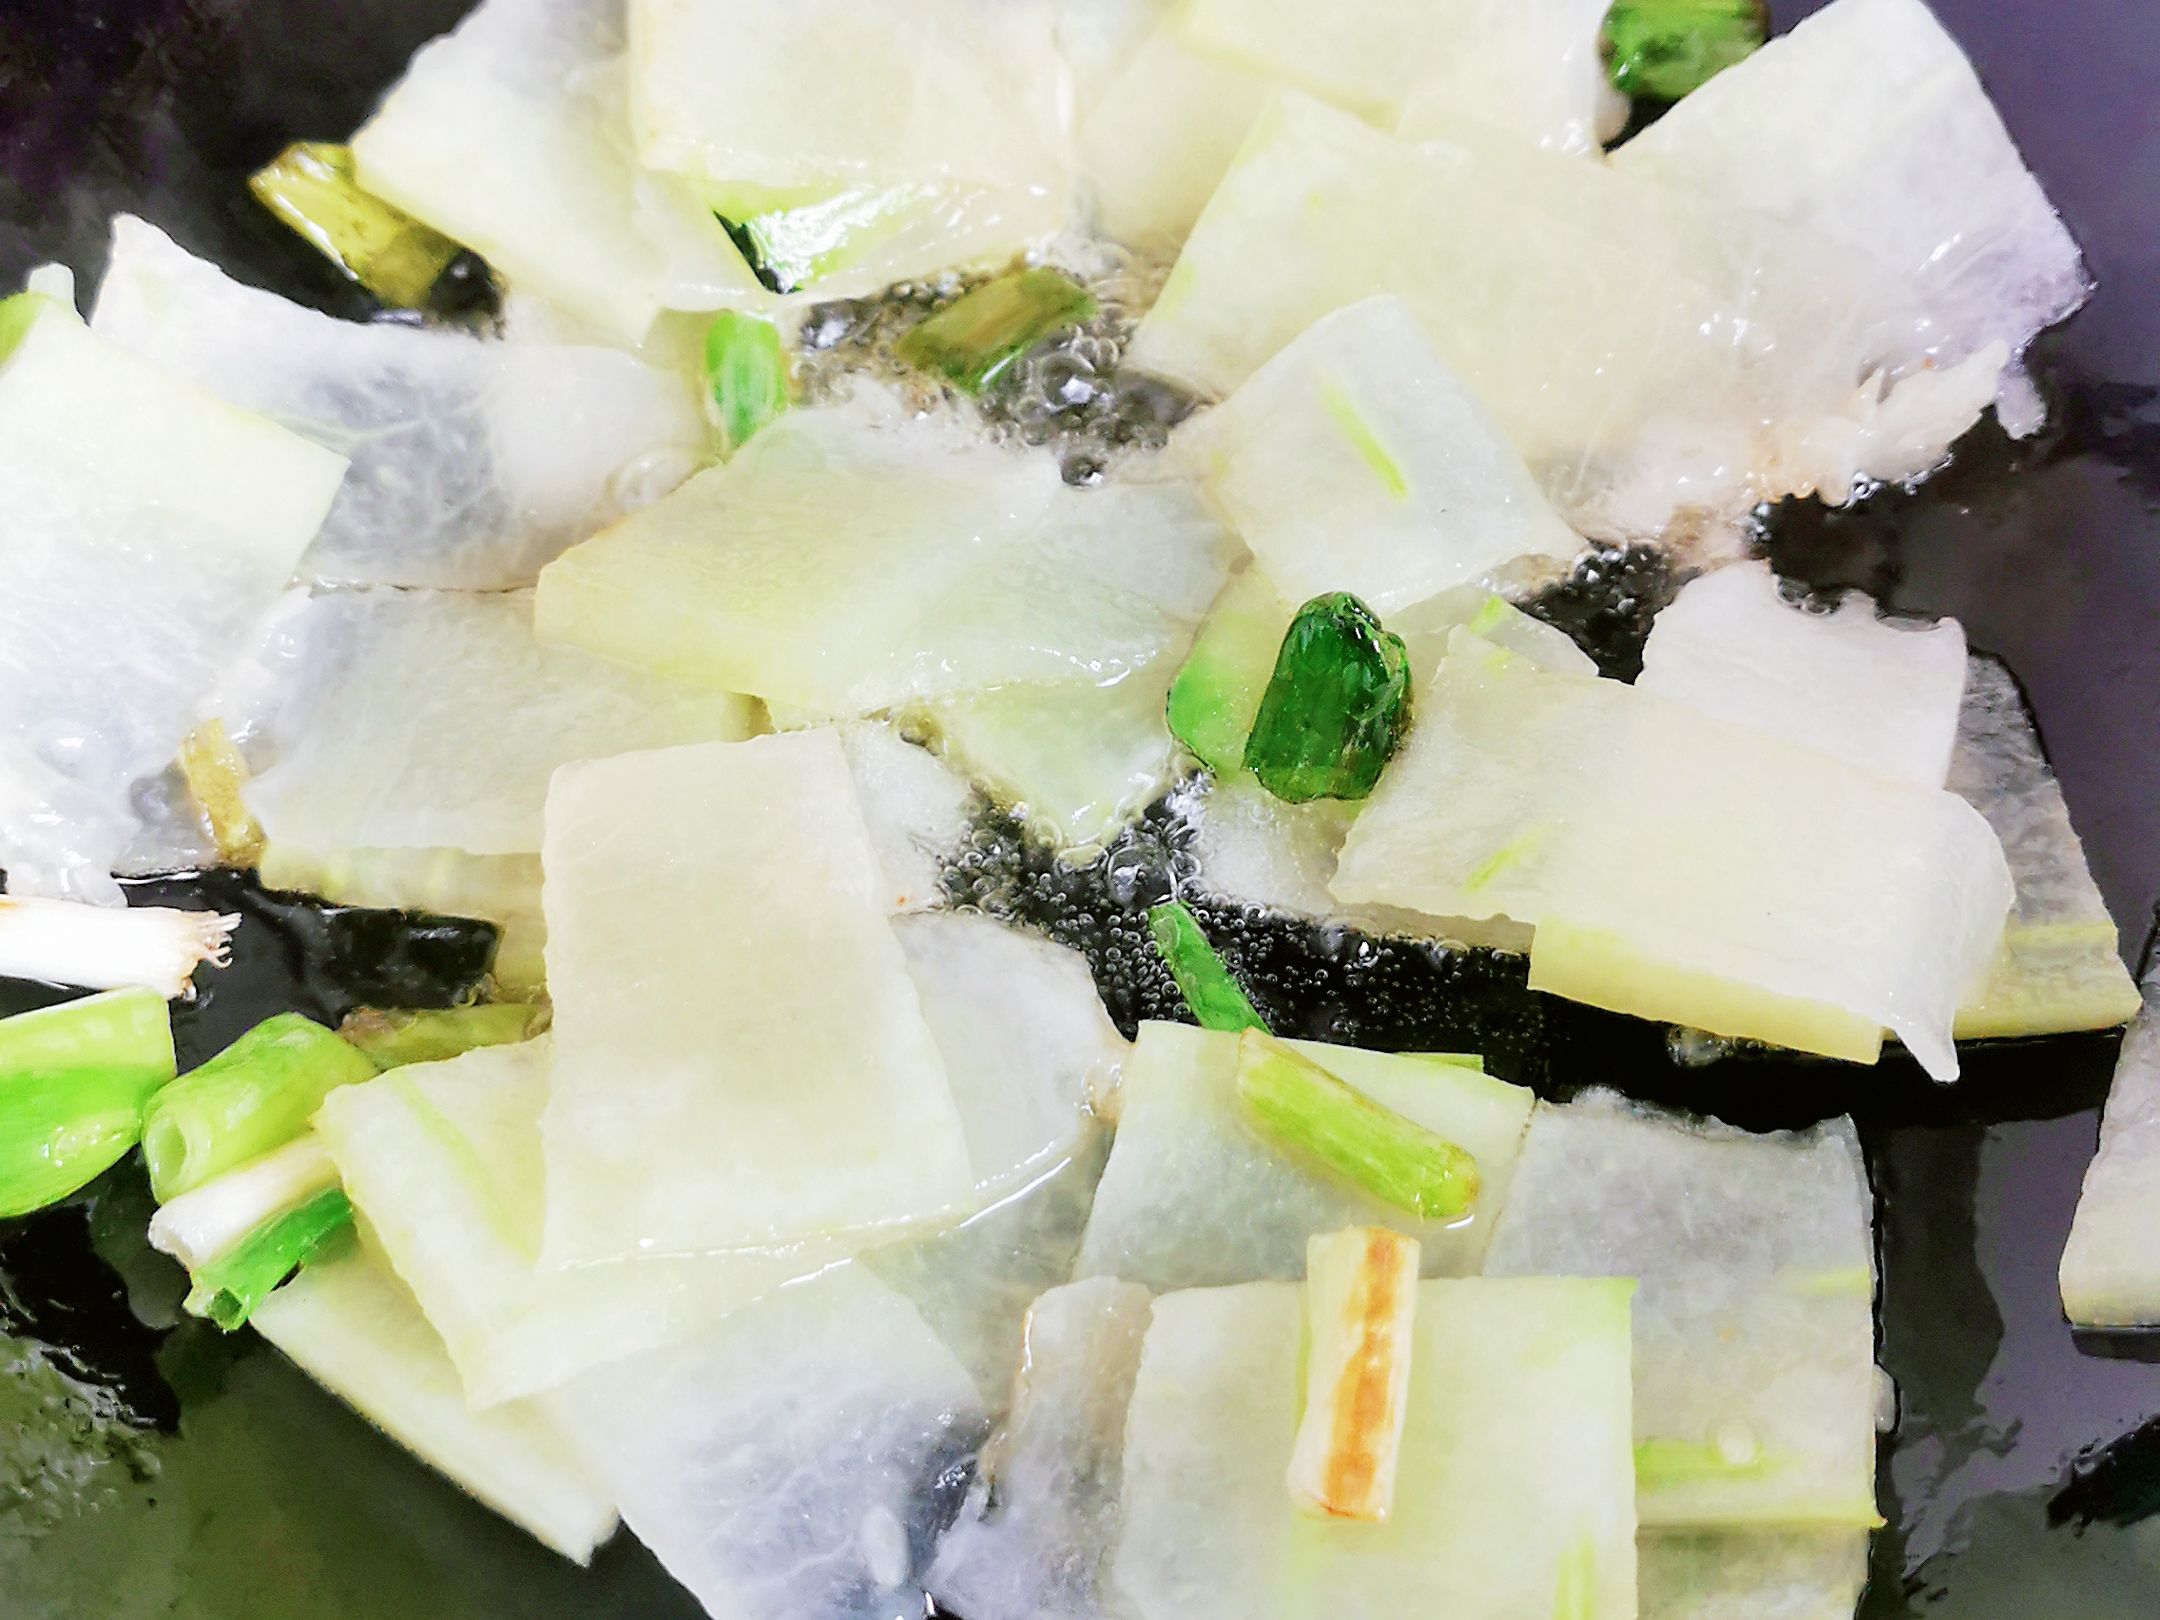 Stir-fried Vegetable Cubes with Winter Melon recipe